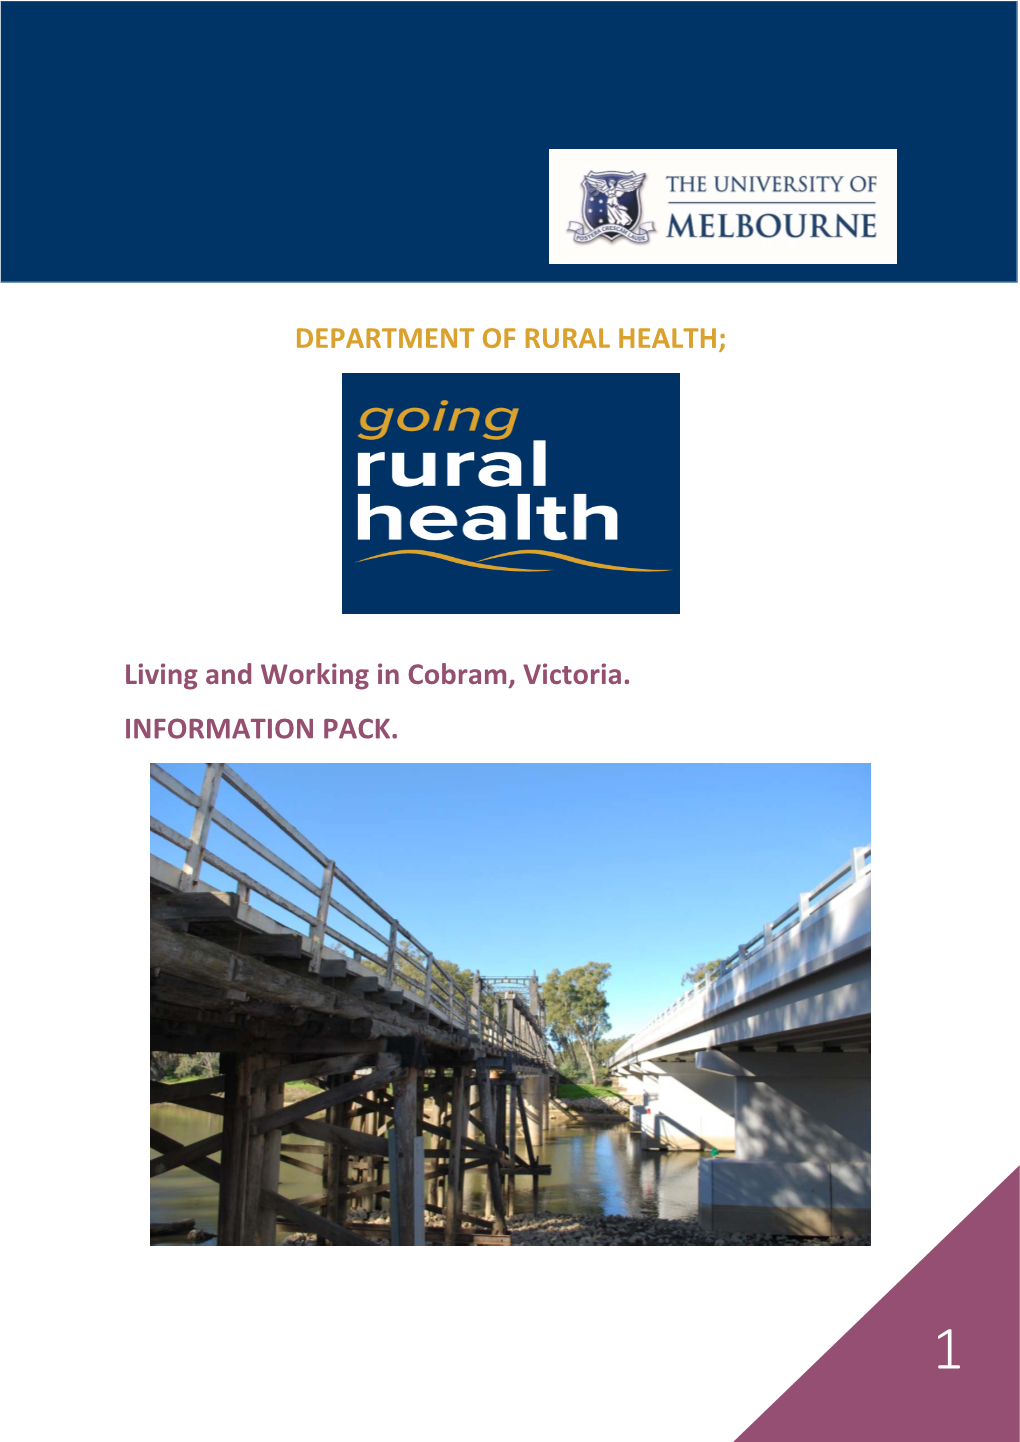 Living and Working in Cobram, Victoria